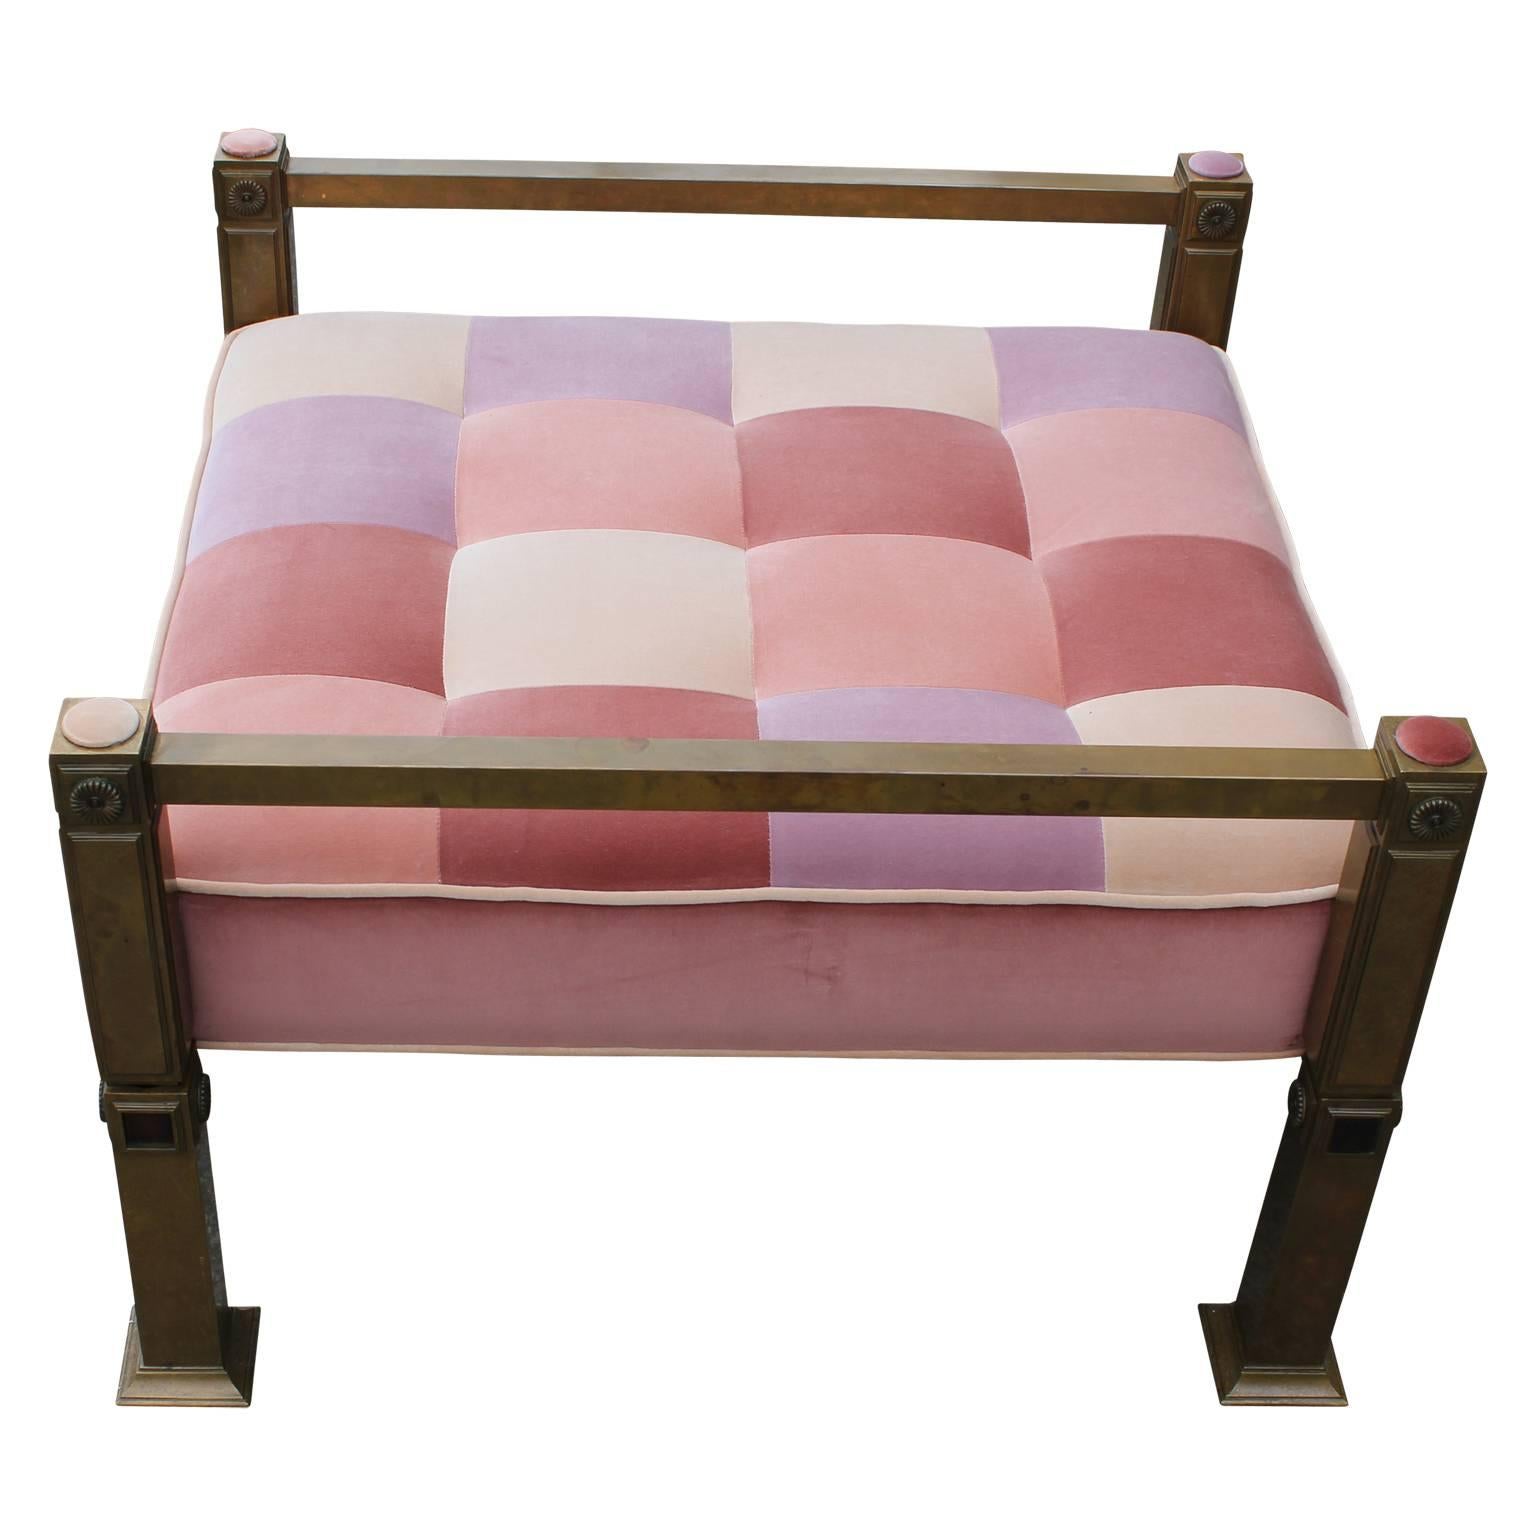 Mid-20th Century Hollywood Regency Mastercraft Style Bench or Ottoman in Pink Velvet Patchwork